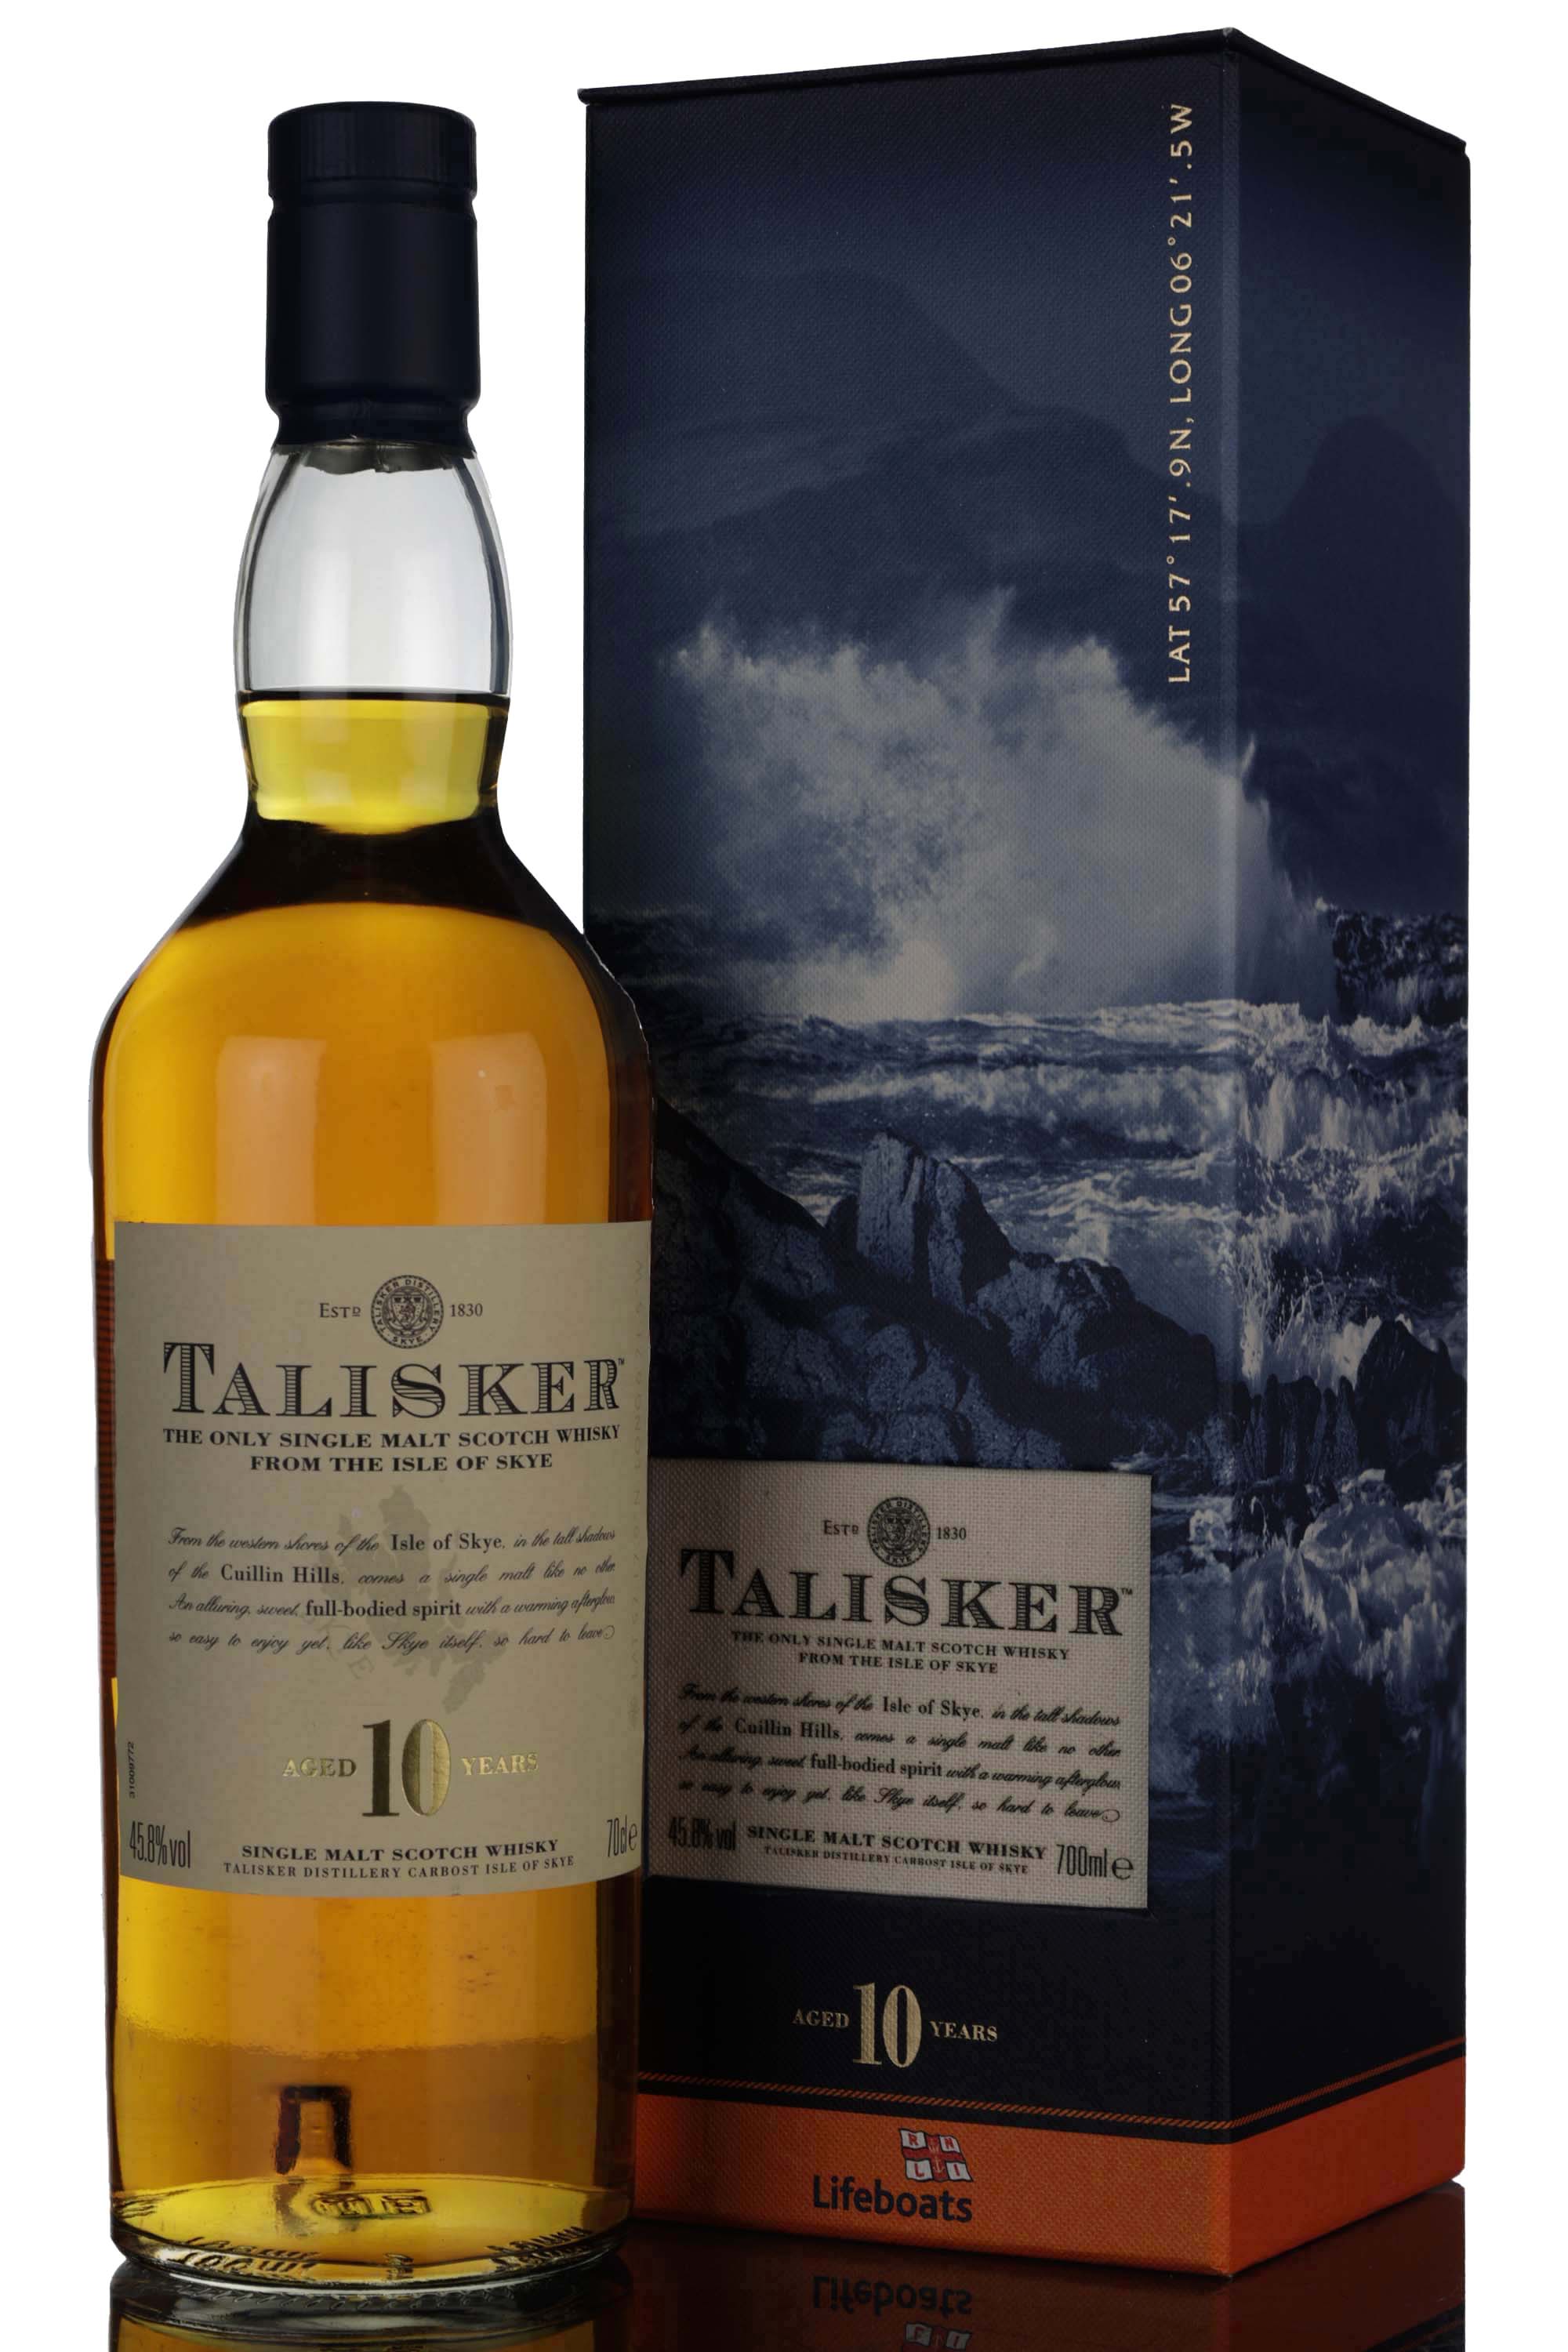 Talisker 10 Year Old - RNLI Lifeboats